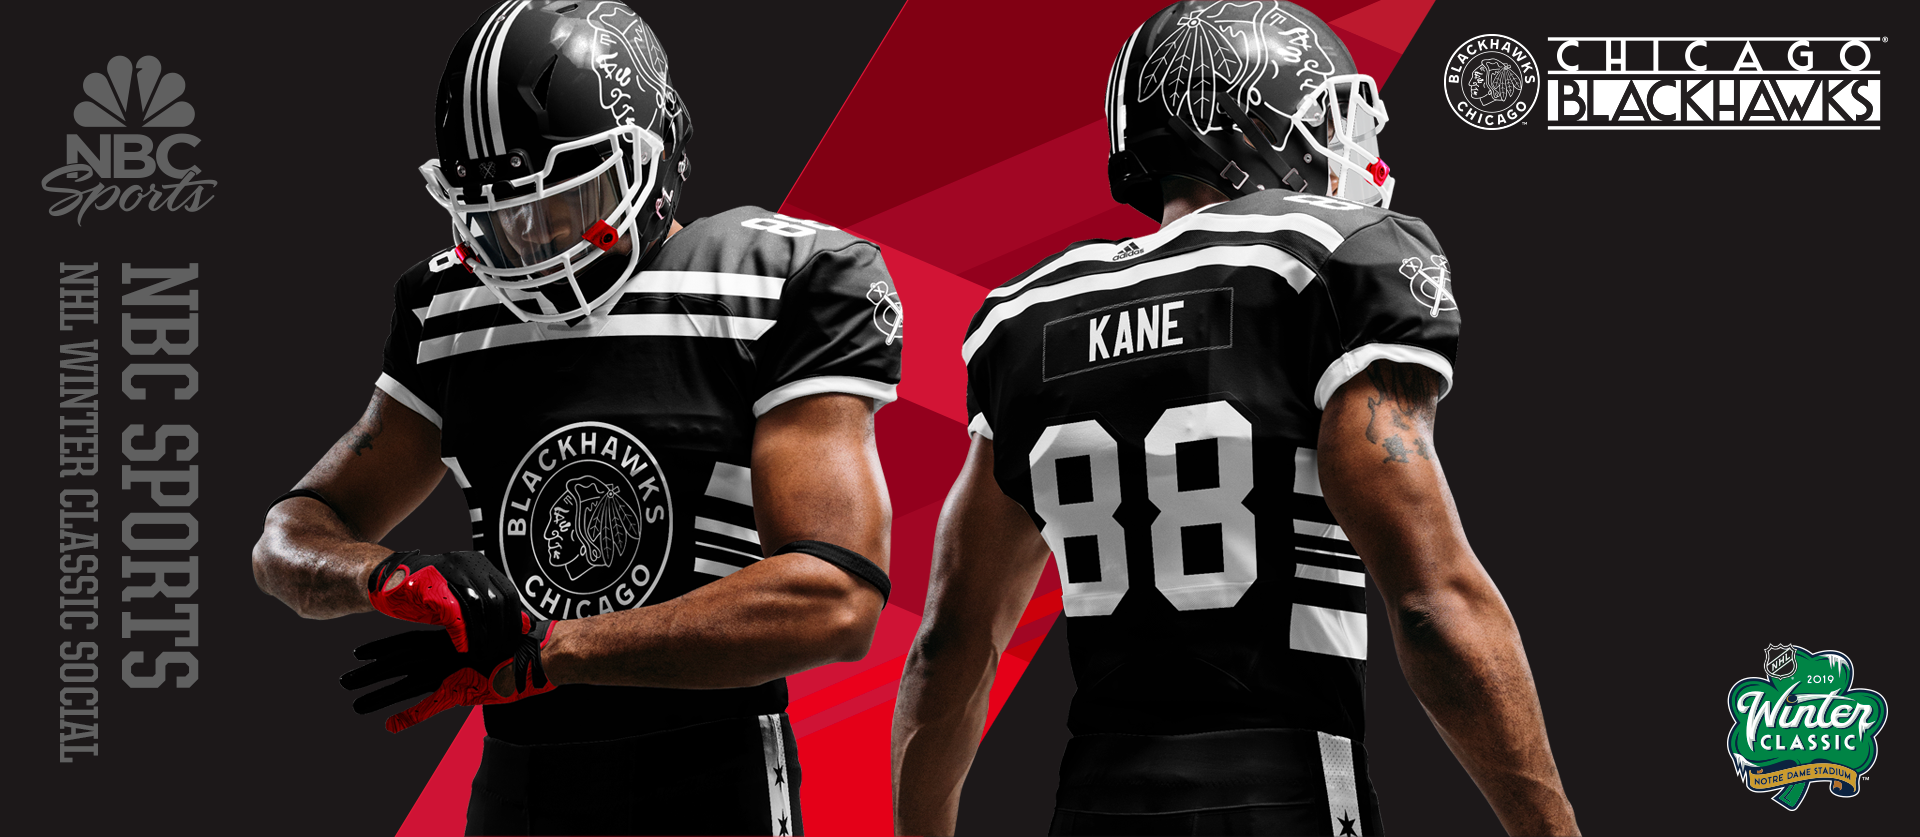 NHL Winter Classic - Chicago Football Uniforms Zoomed